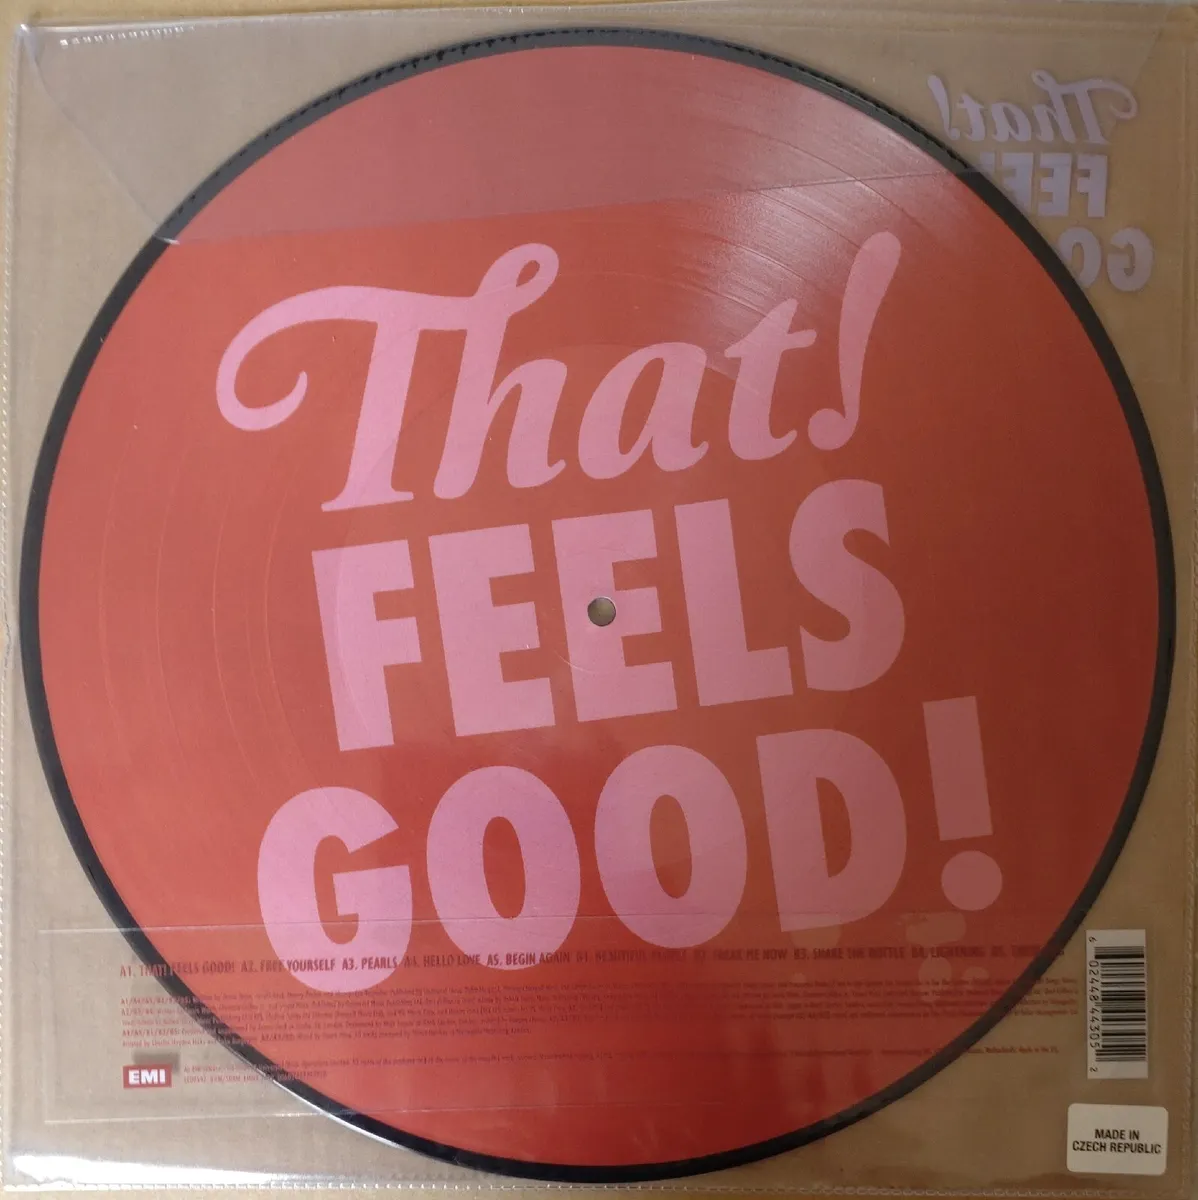 Jessie Ware "That! Feels Good!" Picture Disc LP